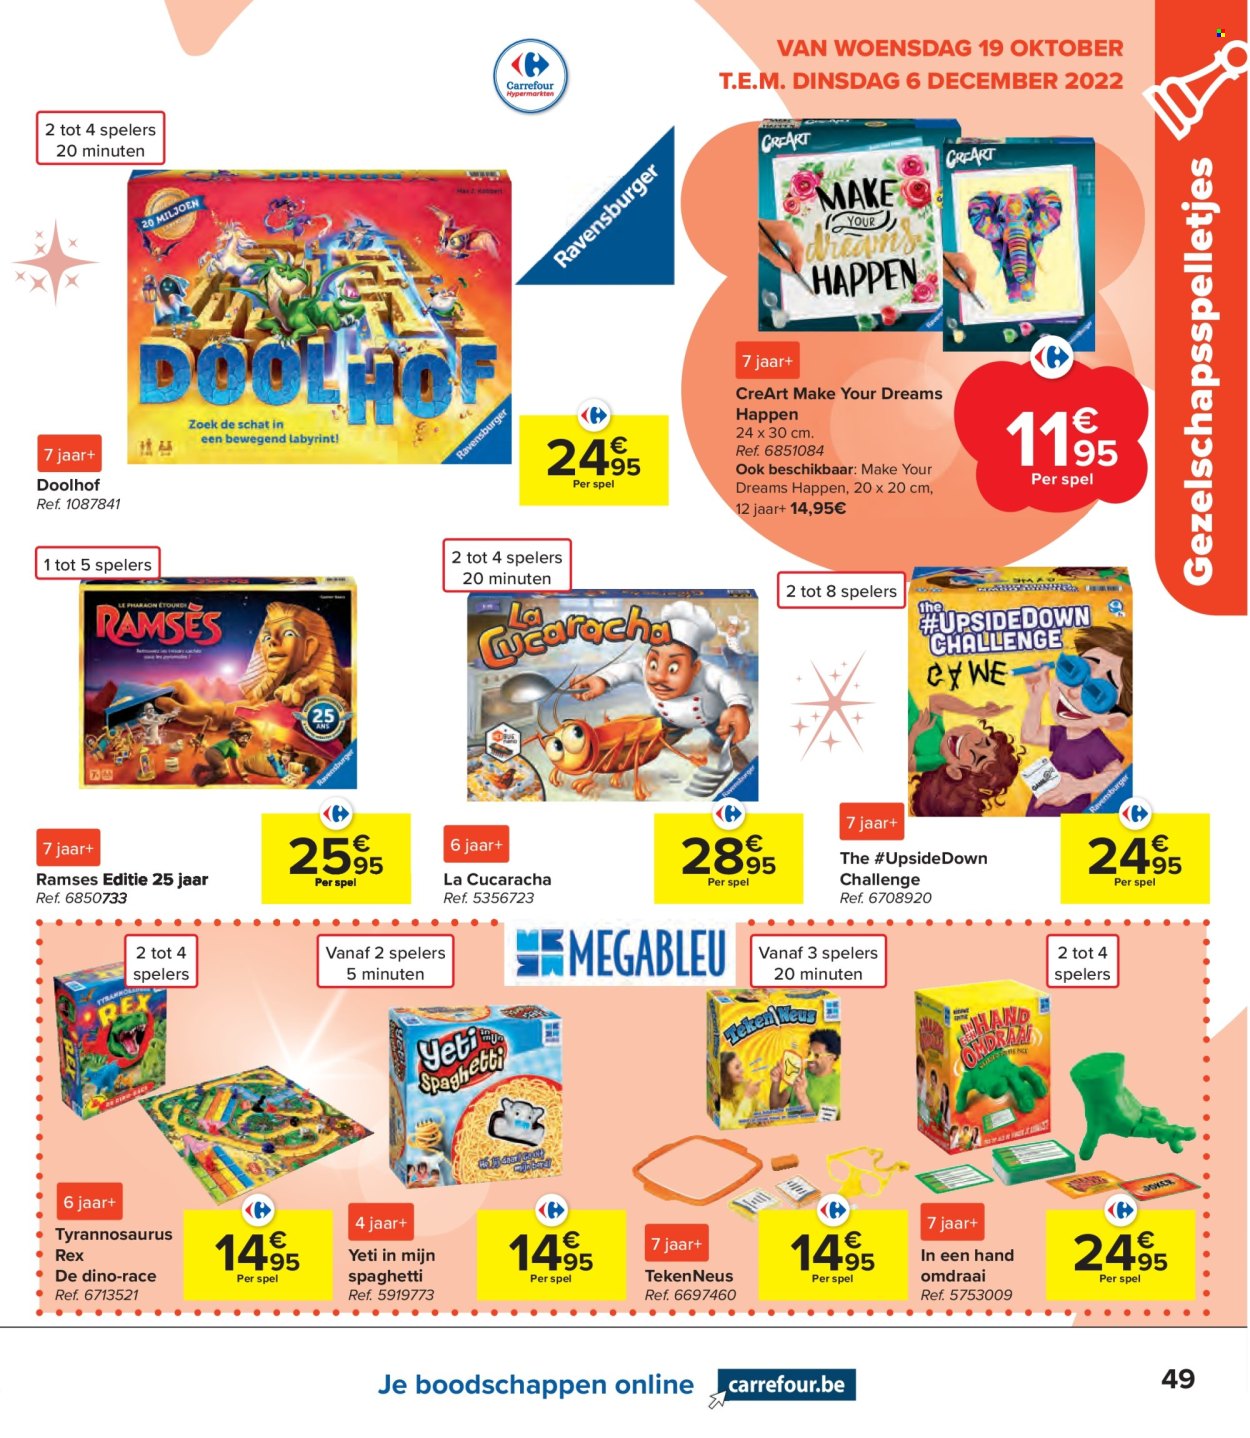 Catalogue Carrefour hypermarkt - 19.10.2022 - 6.12.2022. Page 49.